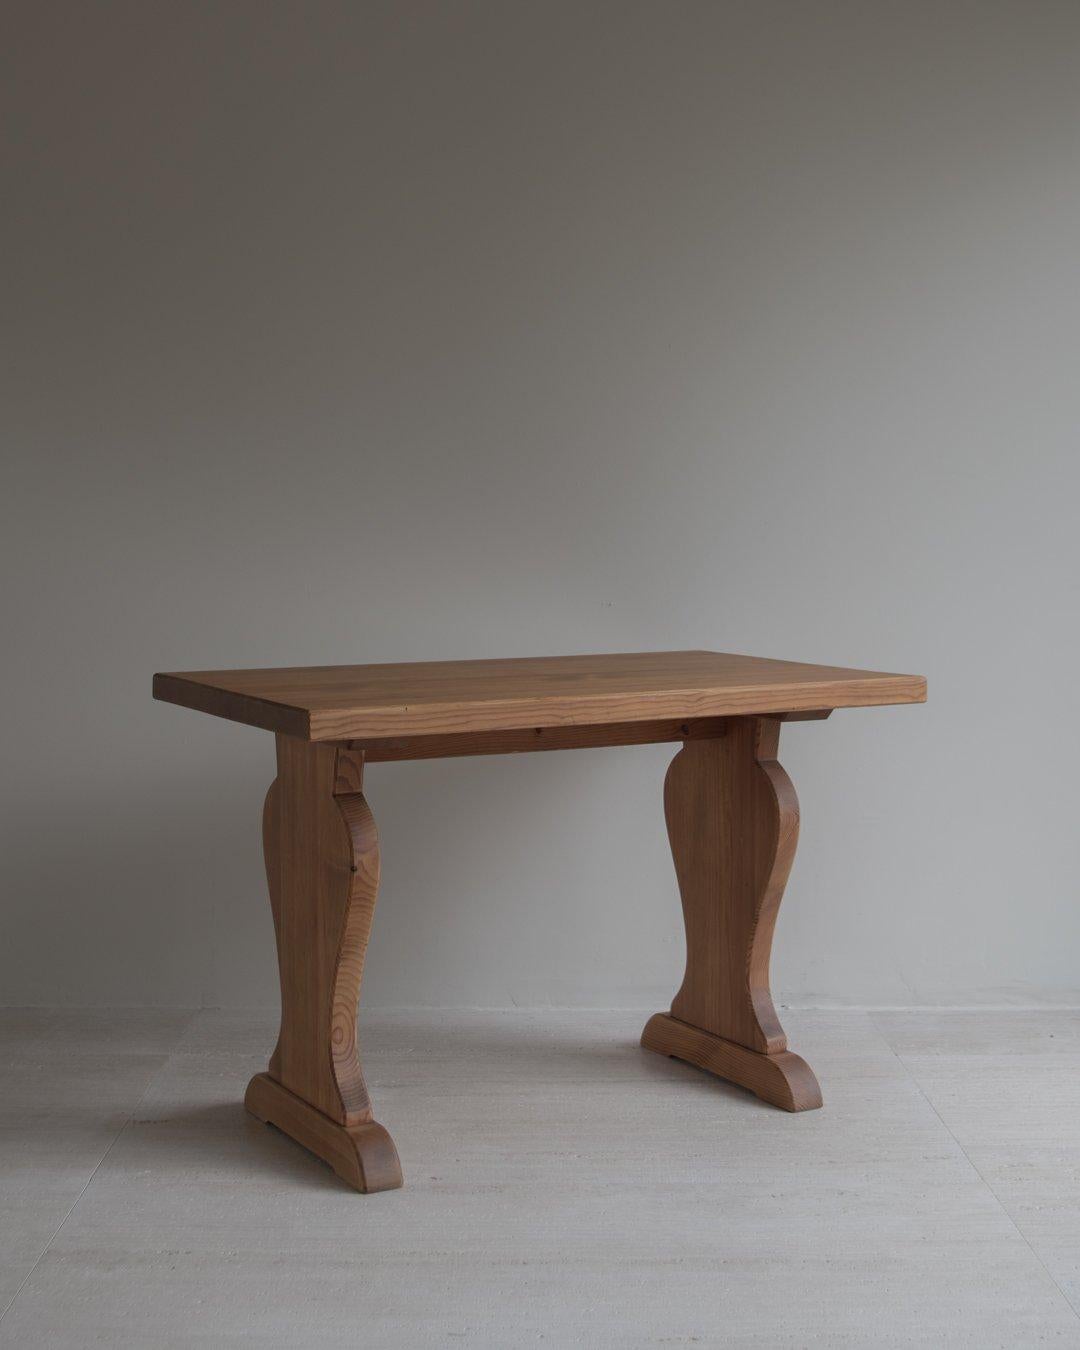 Occasional or small dining table manufactured by Nordiska Kompaniet Sweden, 1940s in pinewood - Attributed to Axel Einar Hjorth - Sold by Fraktgods in 1947 (original receipt attached to the table) - Lovely patina and colour.

The table was